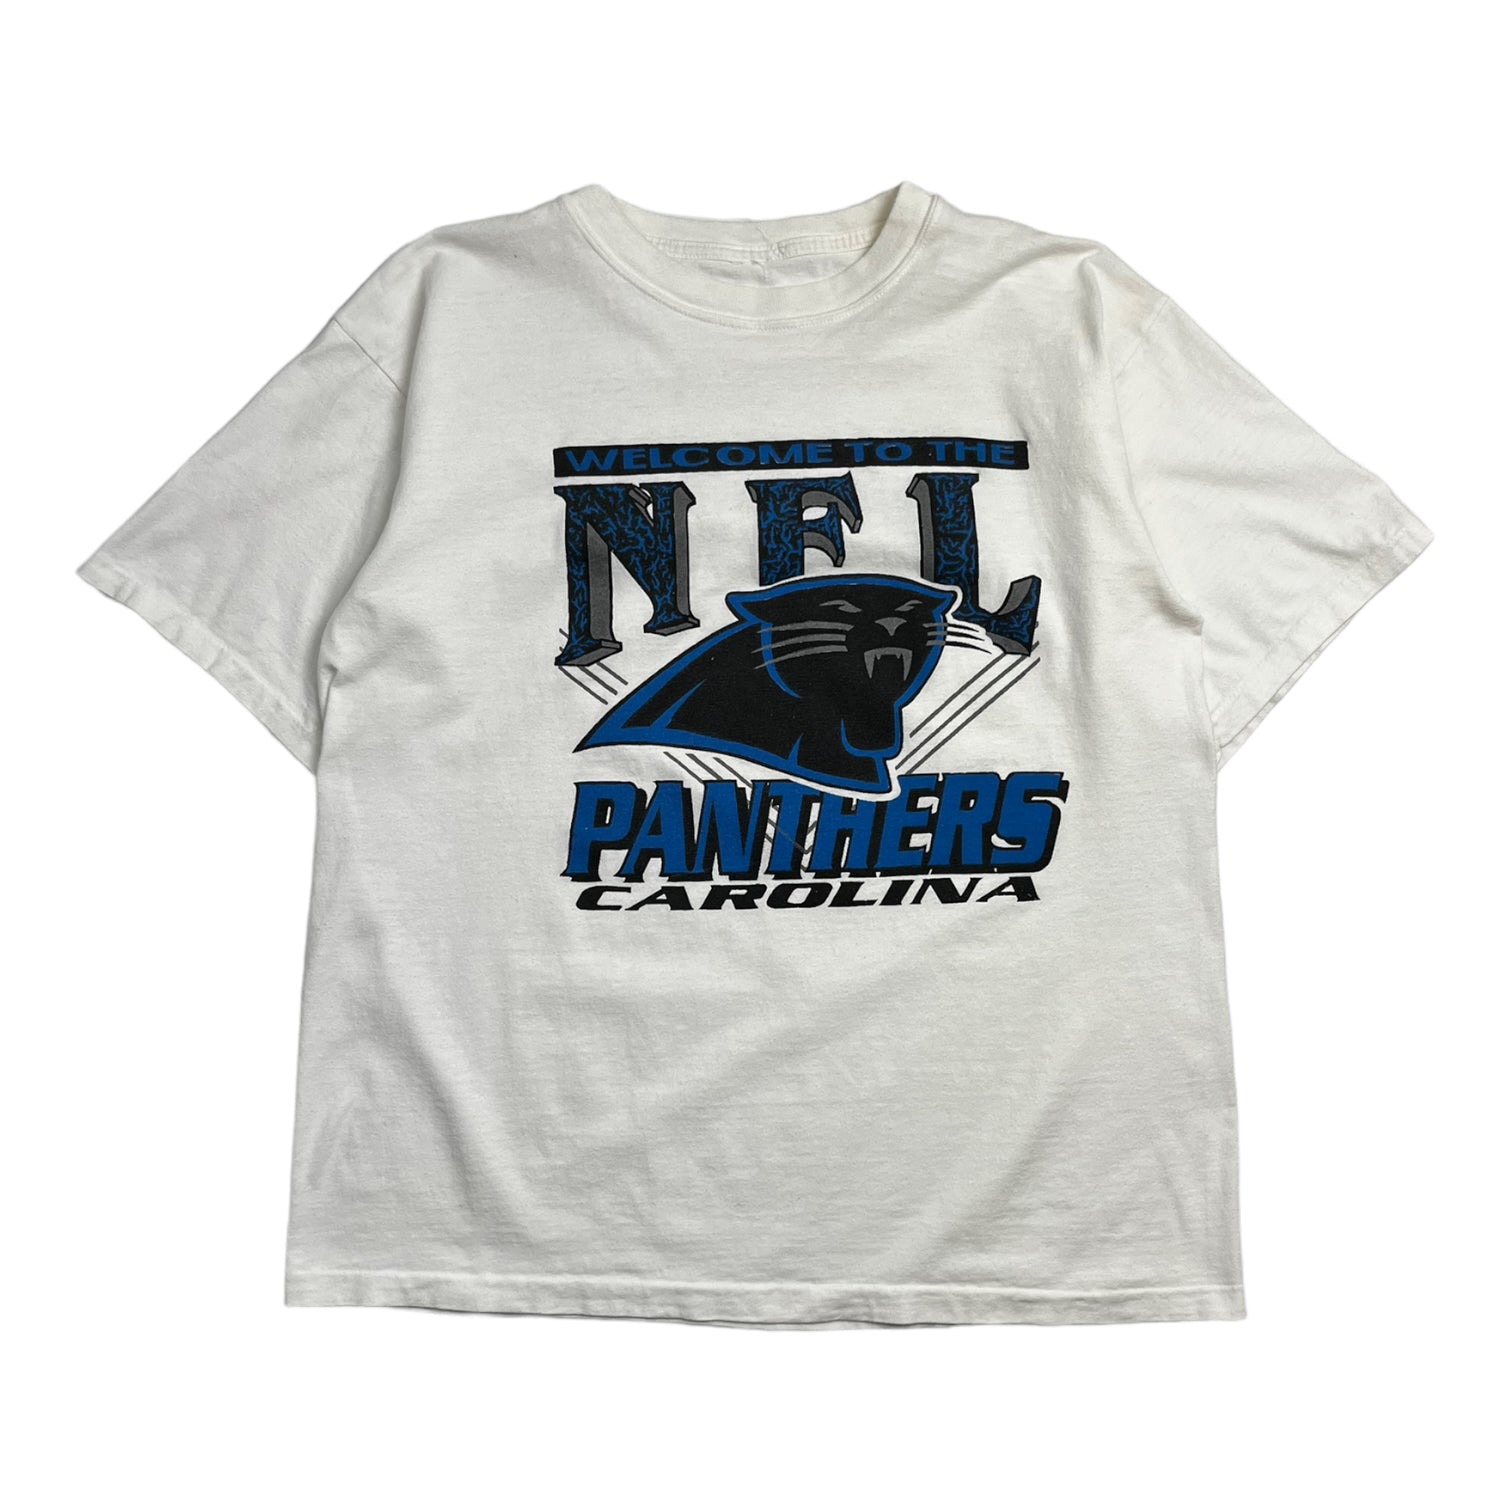 Vintage Carolina Panthers "Welcome To The NFL" Tee white